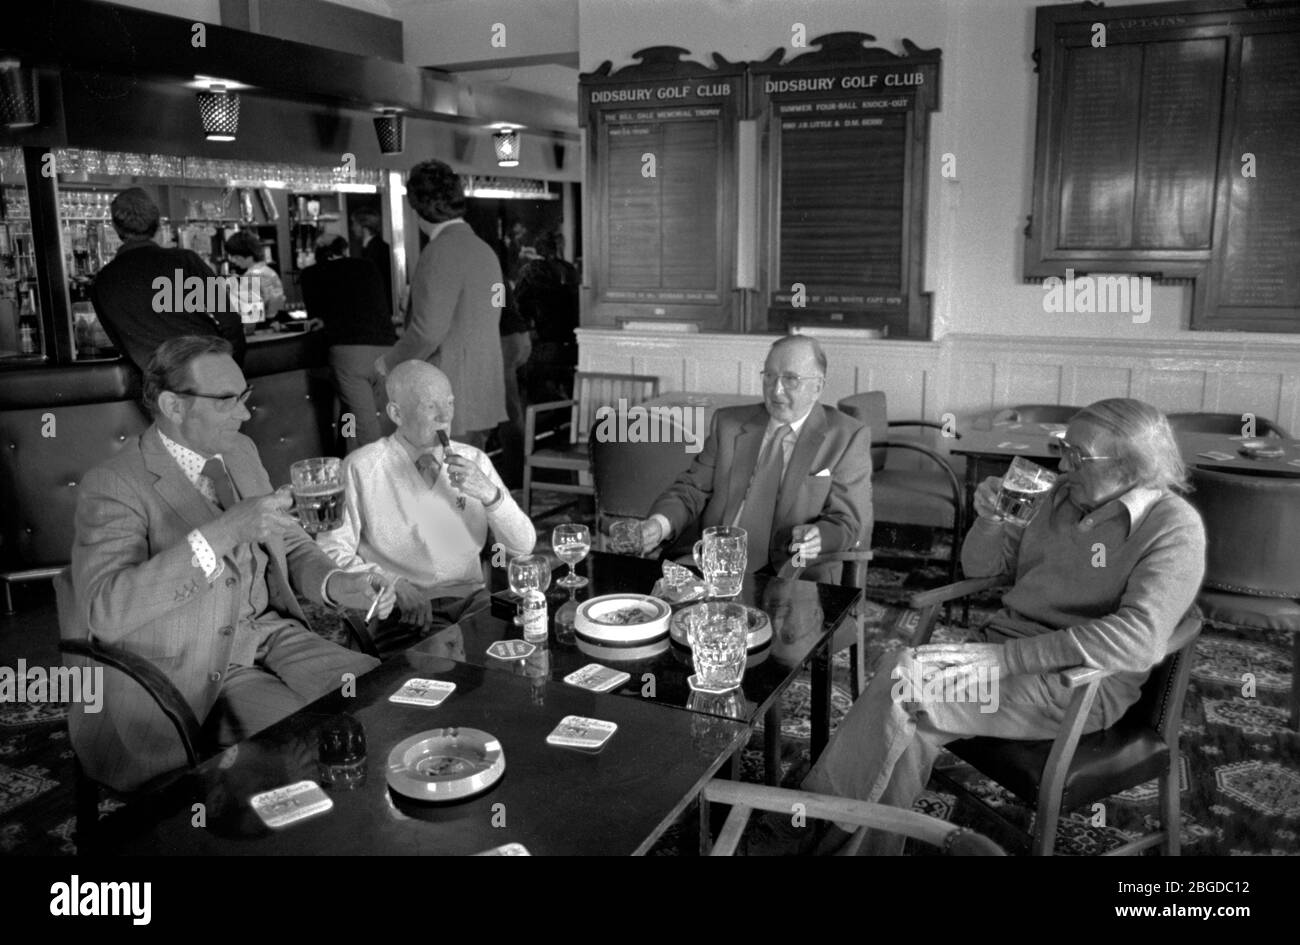 Golf Club bar 1981. Middle England, Middle Class, Middle Age 1980s UK. In the lounge bar a group of men sitting around smoking and chatting and drinking beer. HOMER SYKES Stock Photo